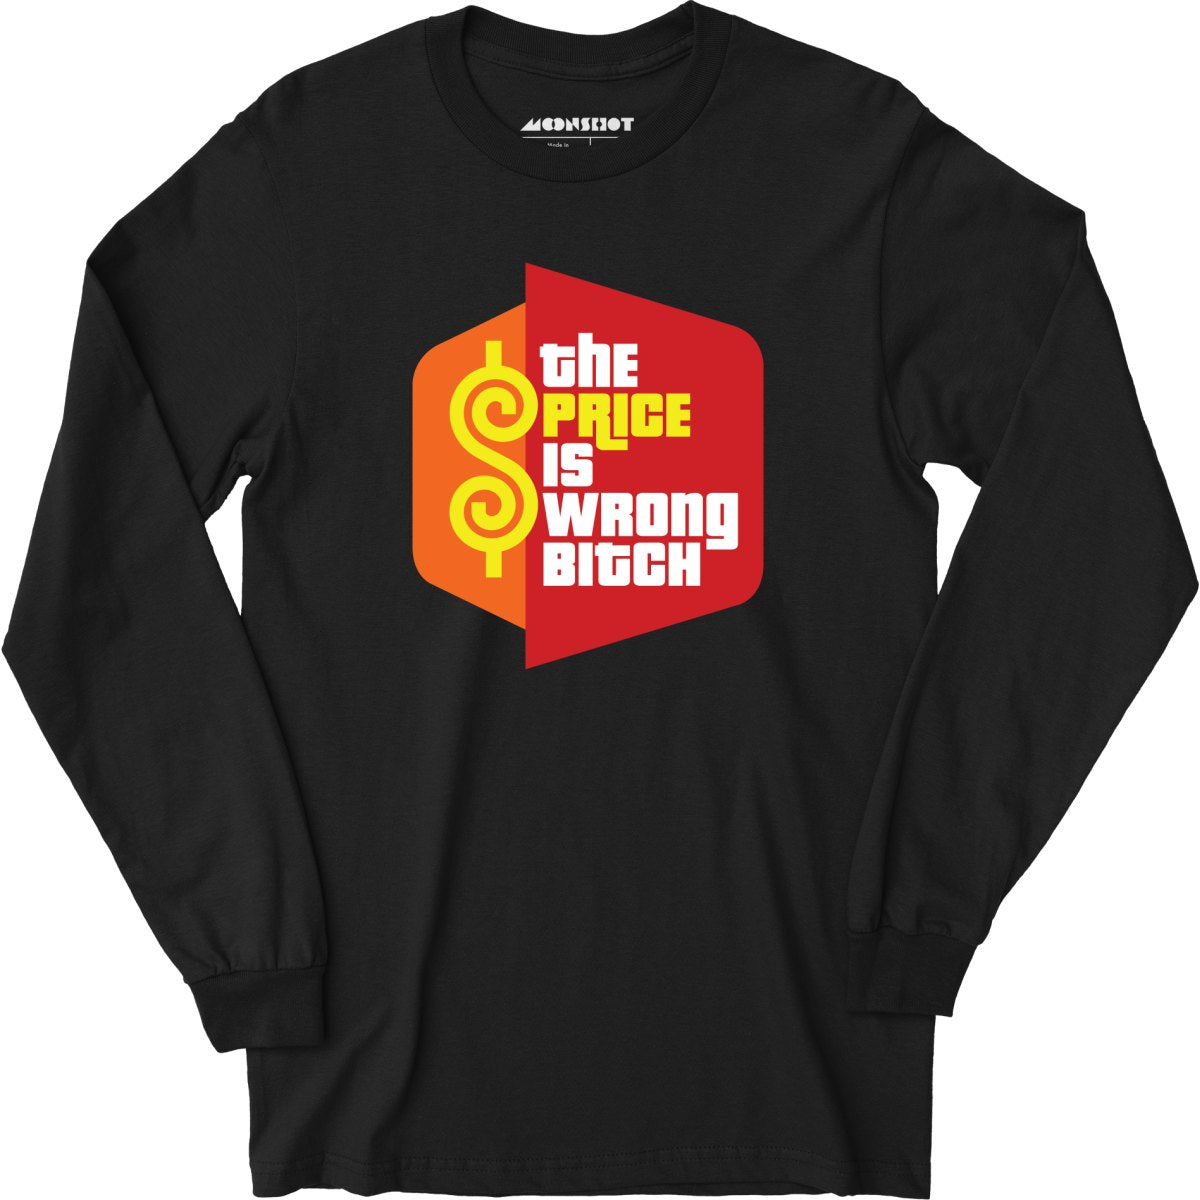 The Price is Wrong Bitch - Long Sleeve T-Shirt